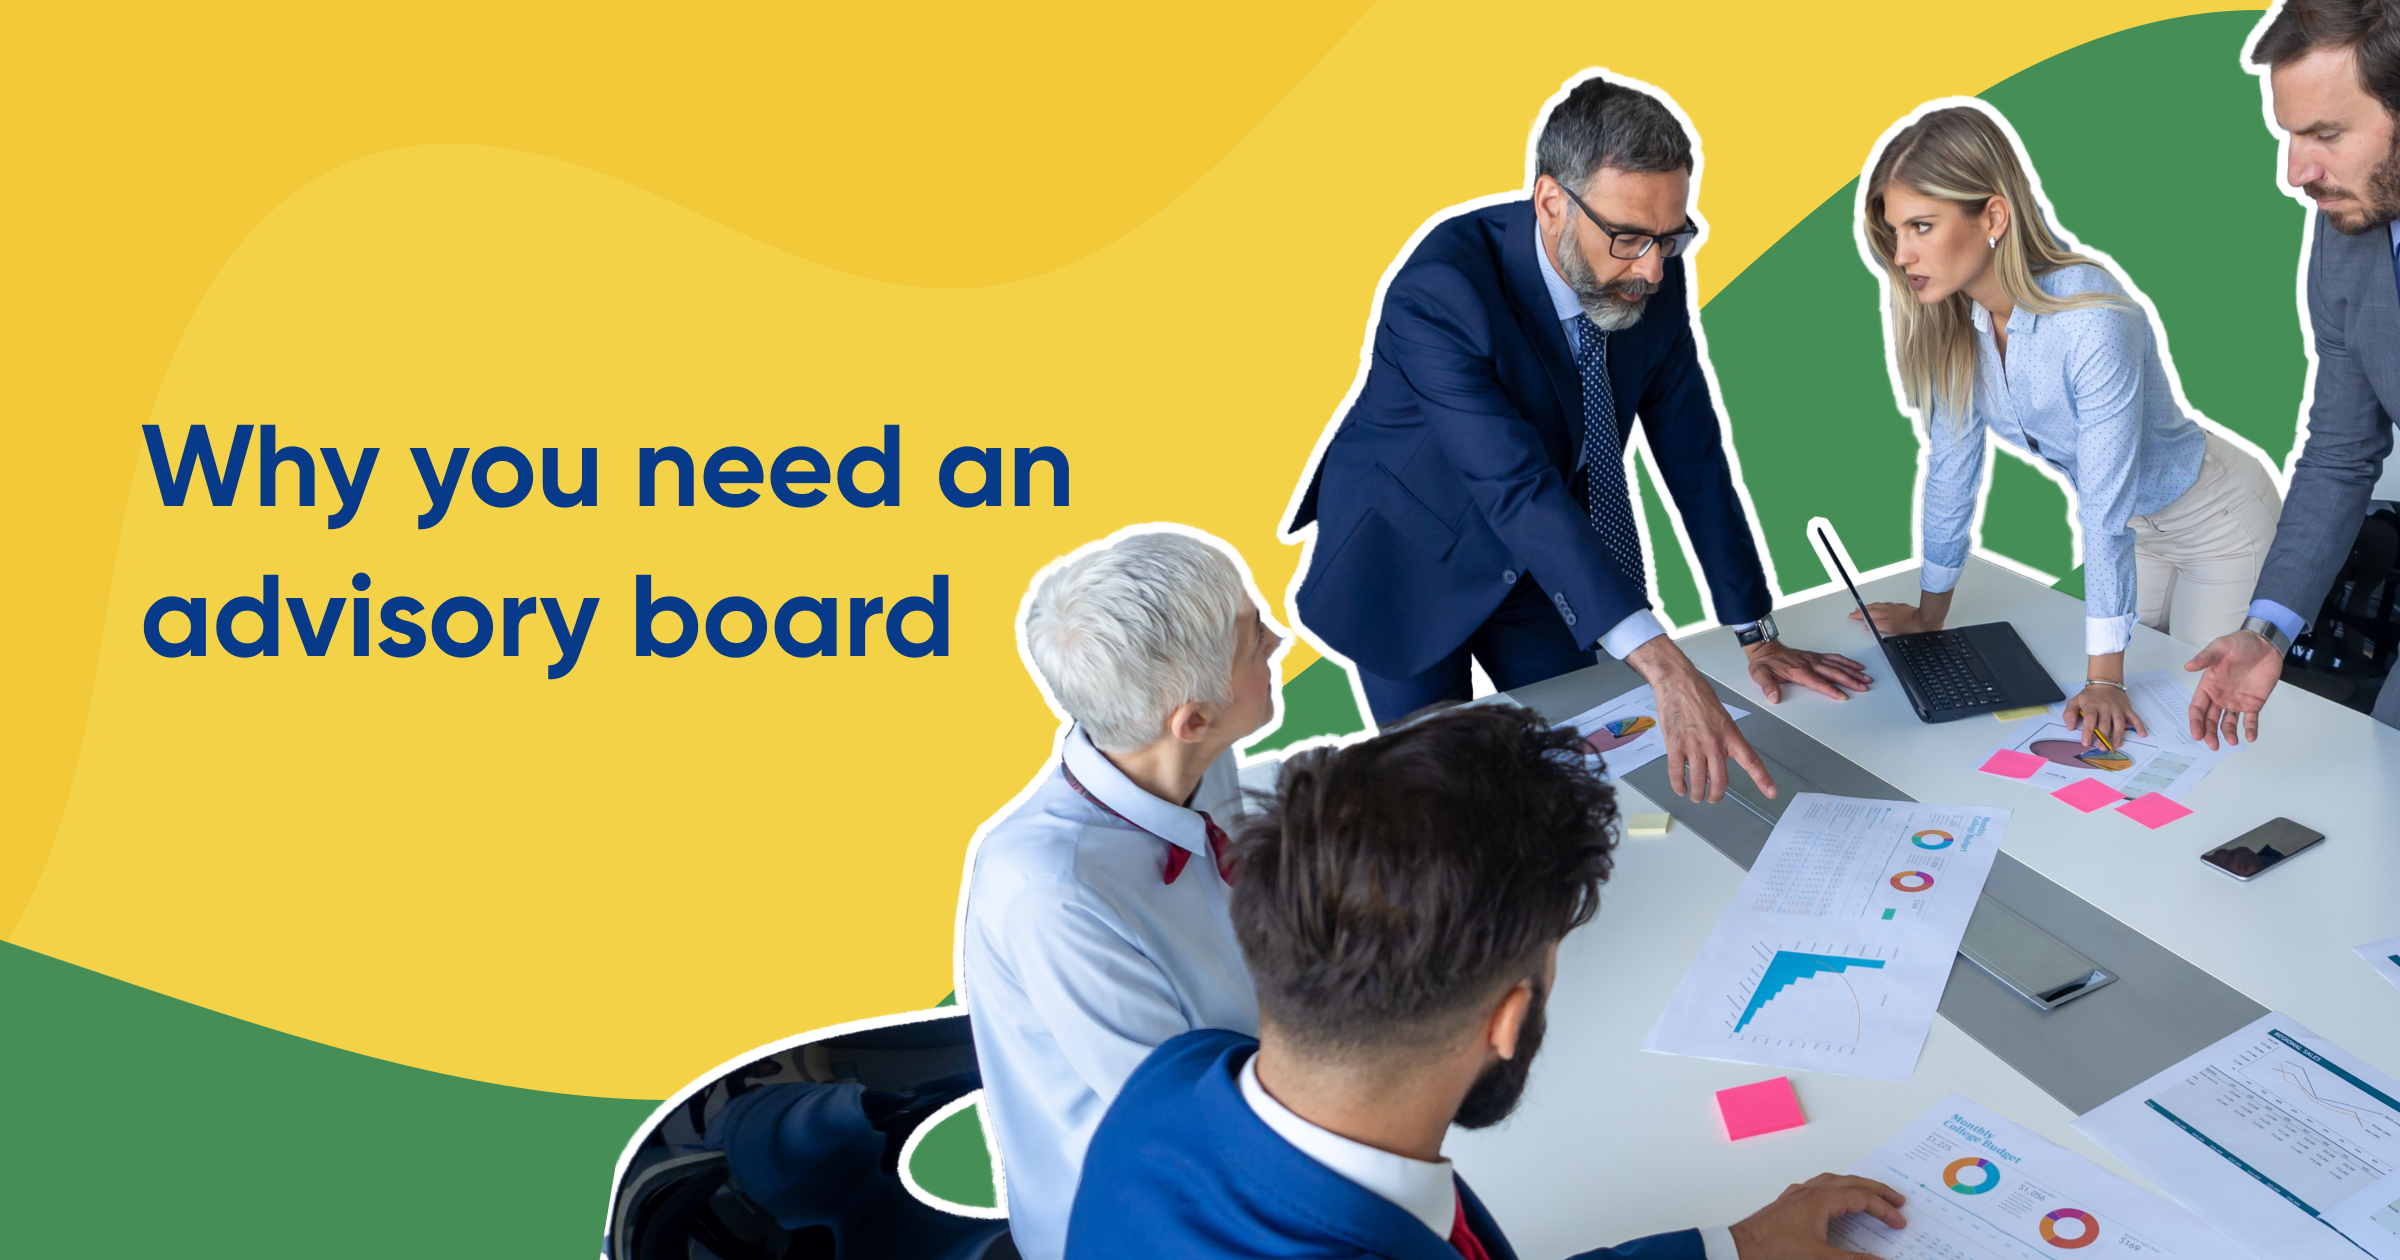 Why you need an advisory board for your small business